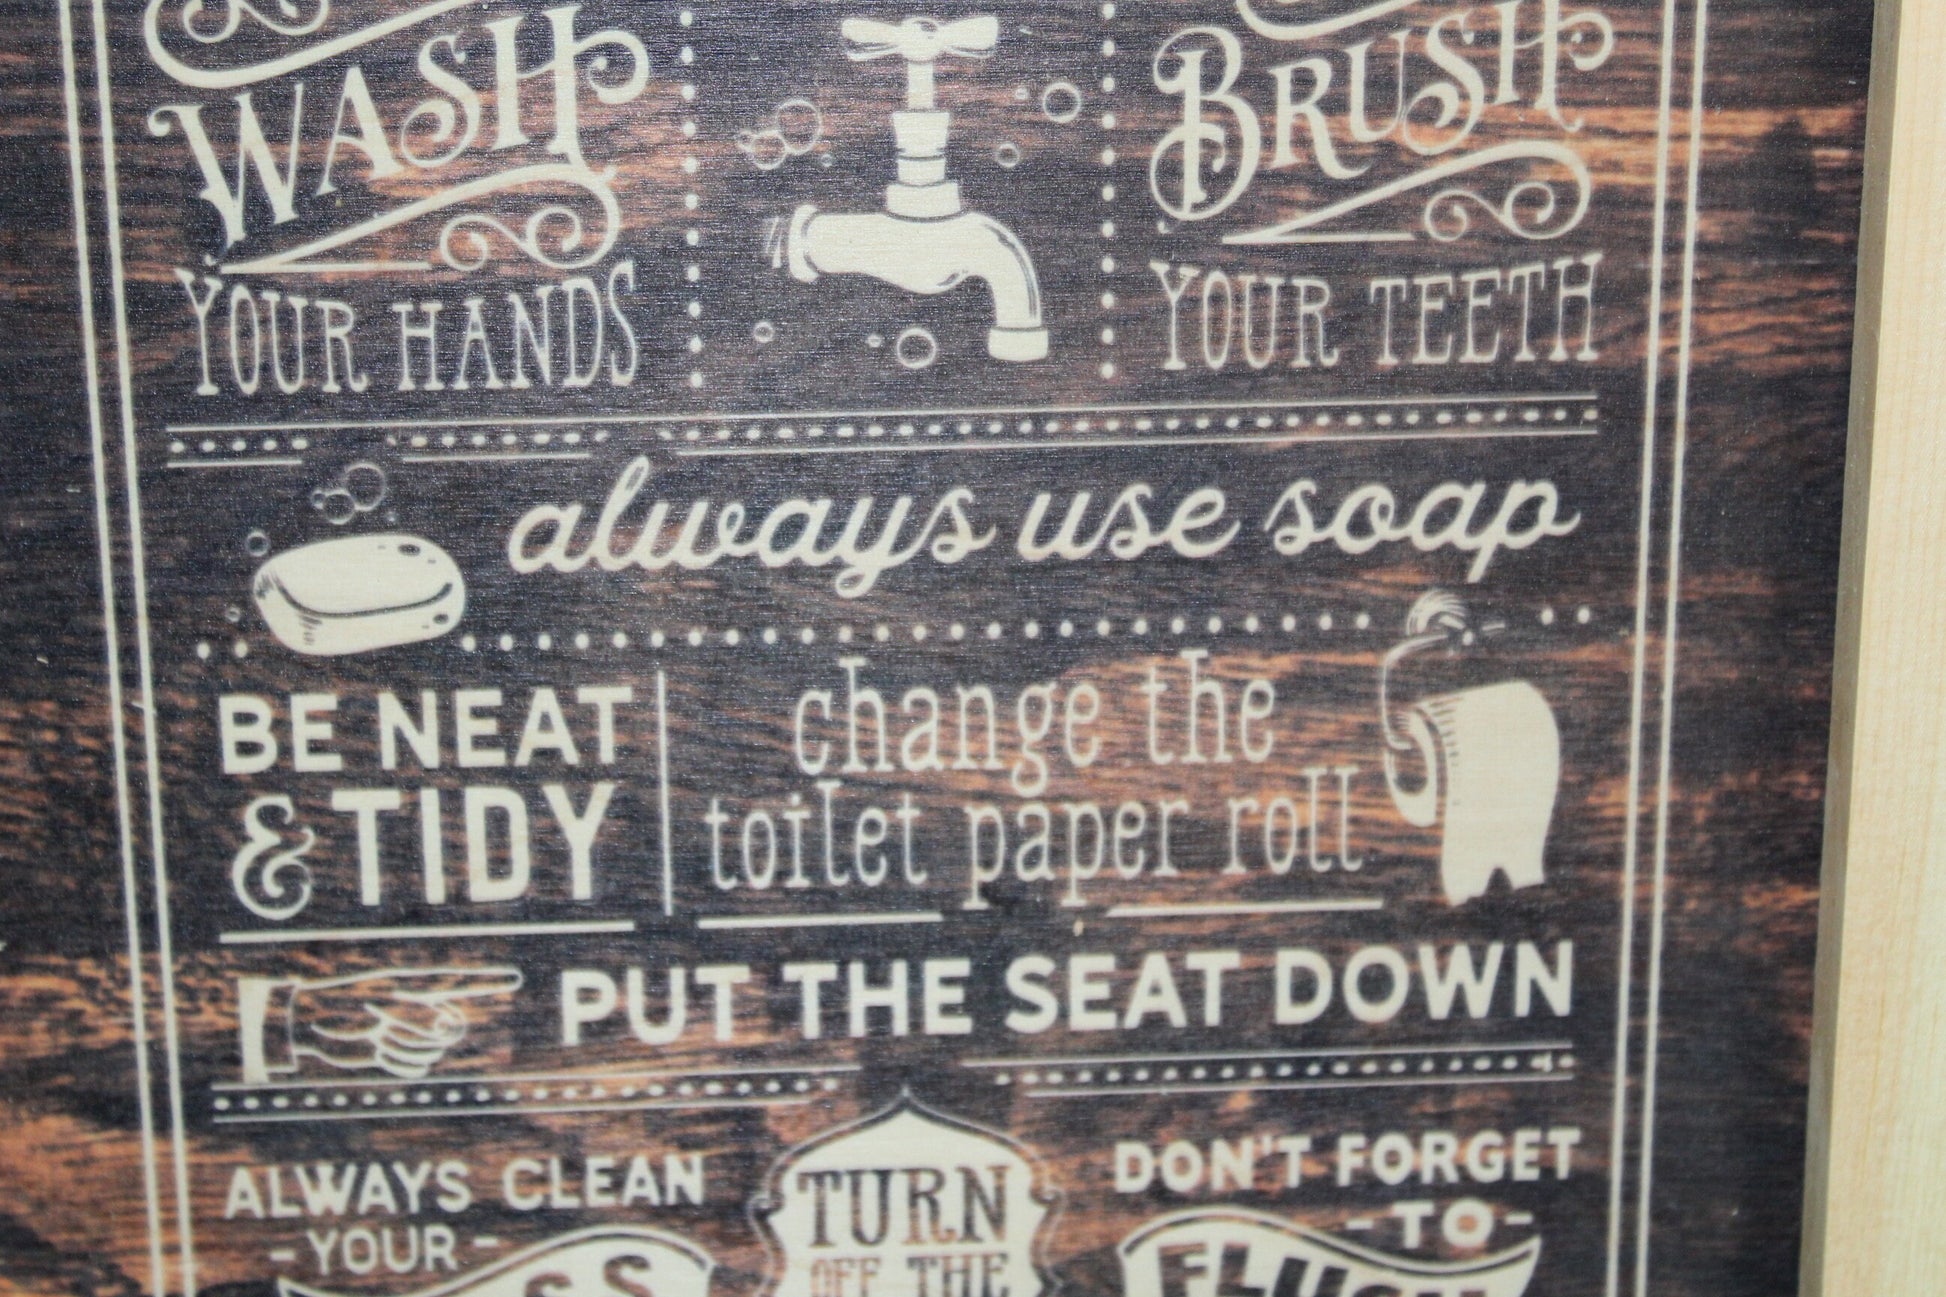 Bathroom Rules Wall Sign Wood Funny Rustic Wash Brush Tidy Change the Paper Put the Lid Down List Framed Hanging Decoration Decor Art